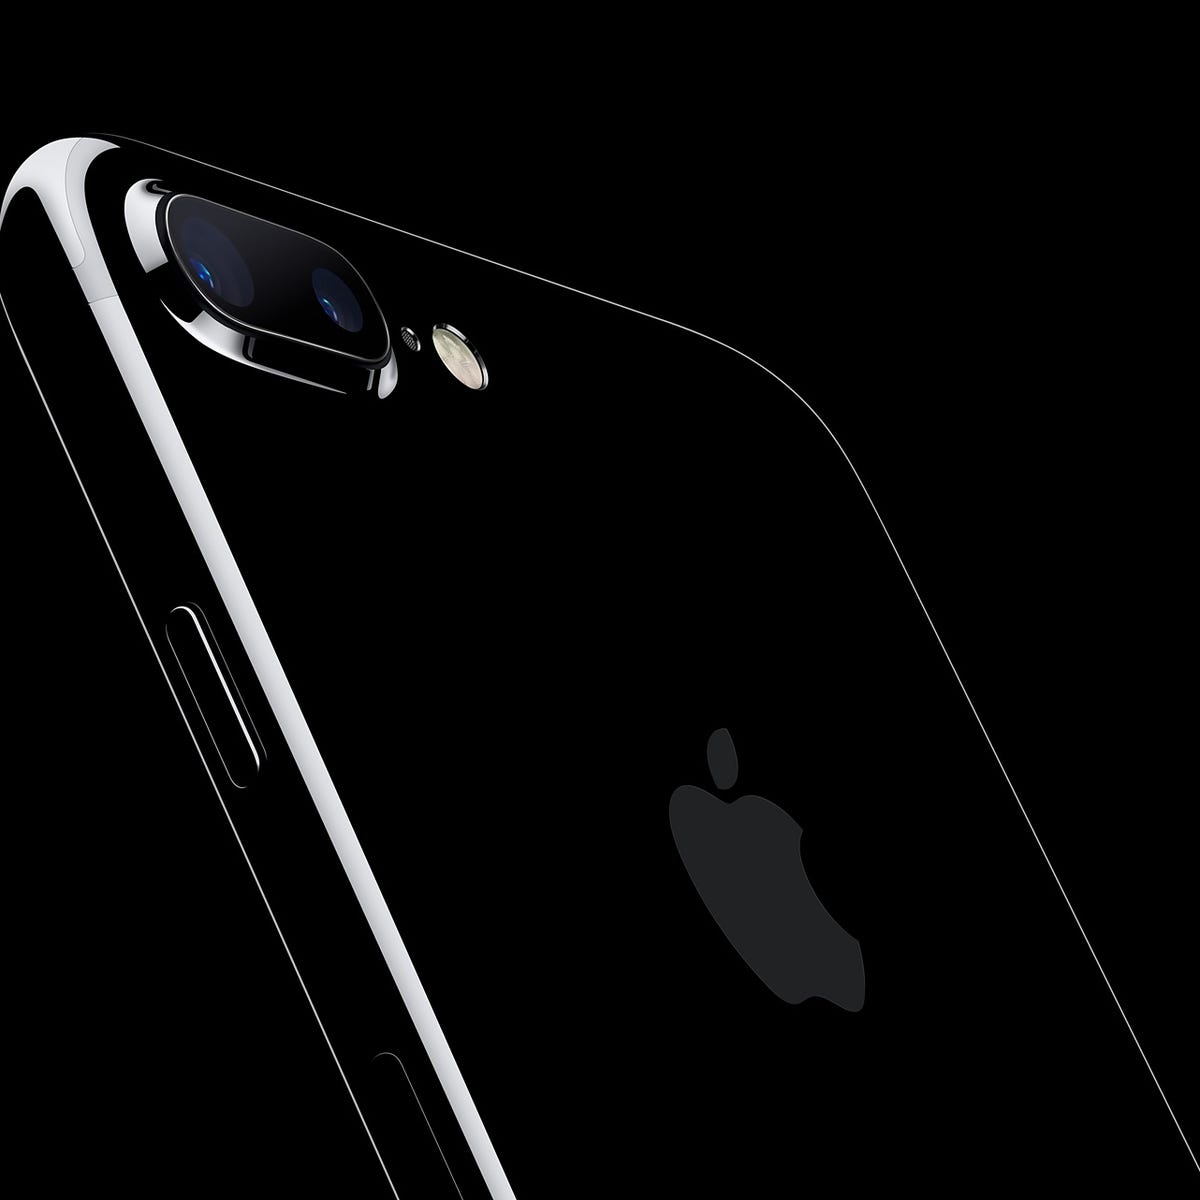 Apple S Warranty For Water Resistant Iphone 7 Doesn T Cover Liquid Damage Zdnet